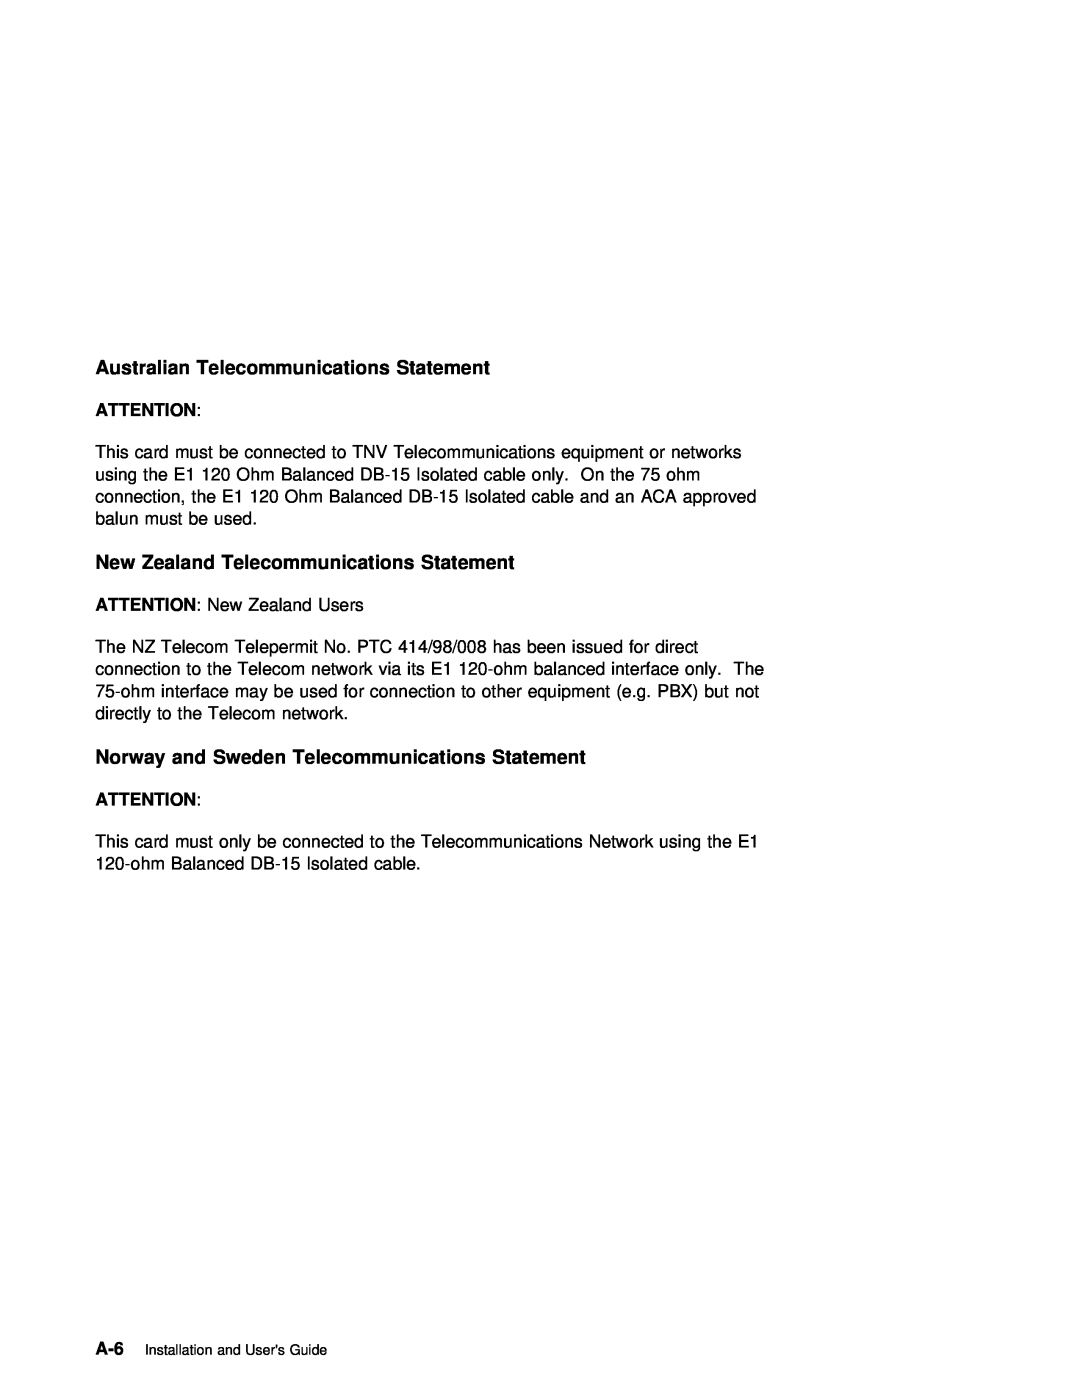 IBM ARTIC960RxD manual New Zealand Telecommunications Statement, Norway and Sweden Telecommunications Statement, must 